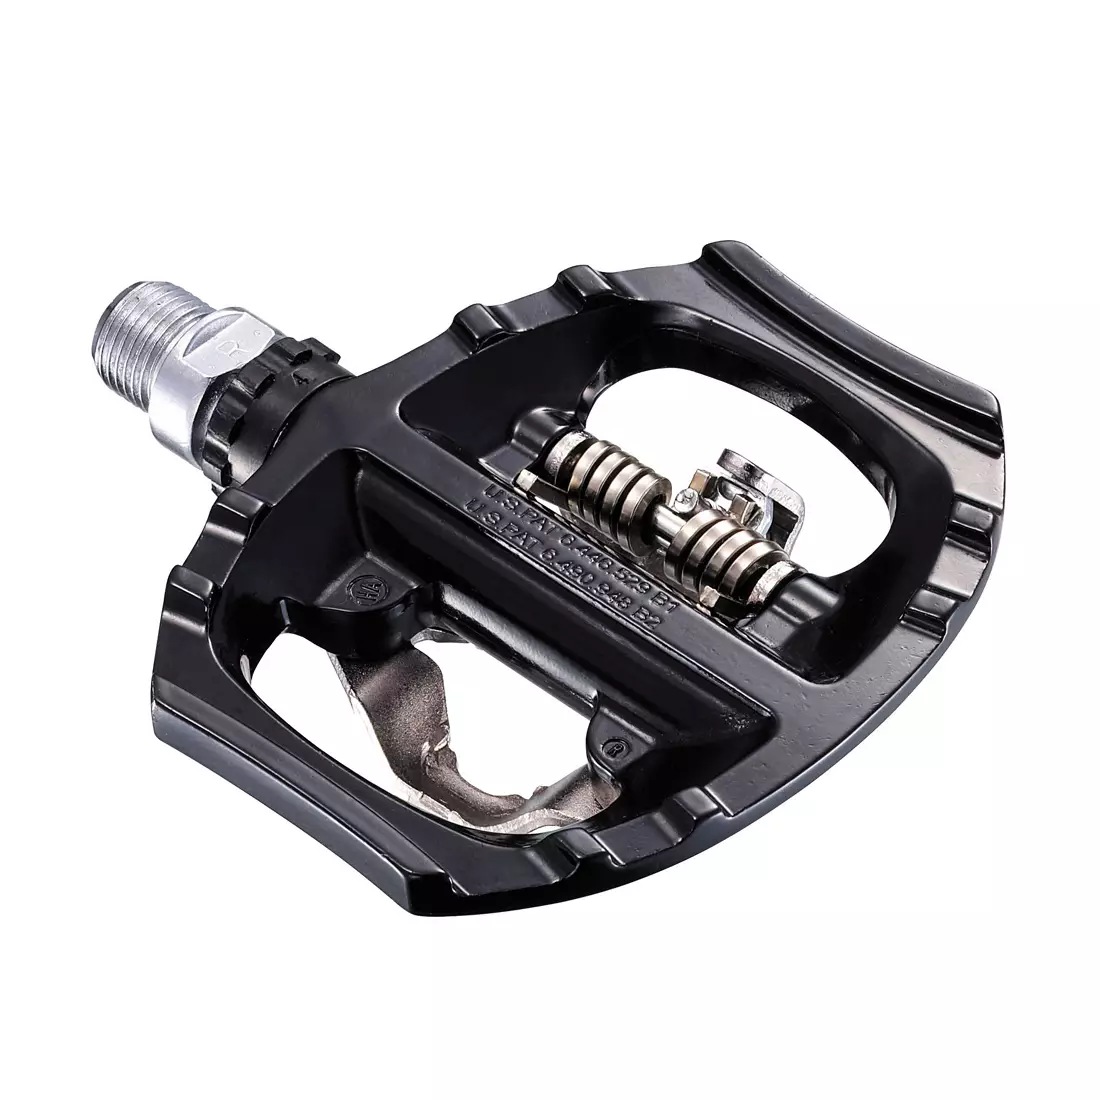 SHIMANO SPD PD-A530 MTB/trekking bicycle pedals with cleats